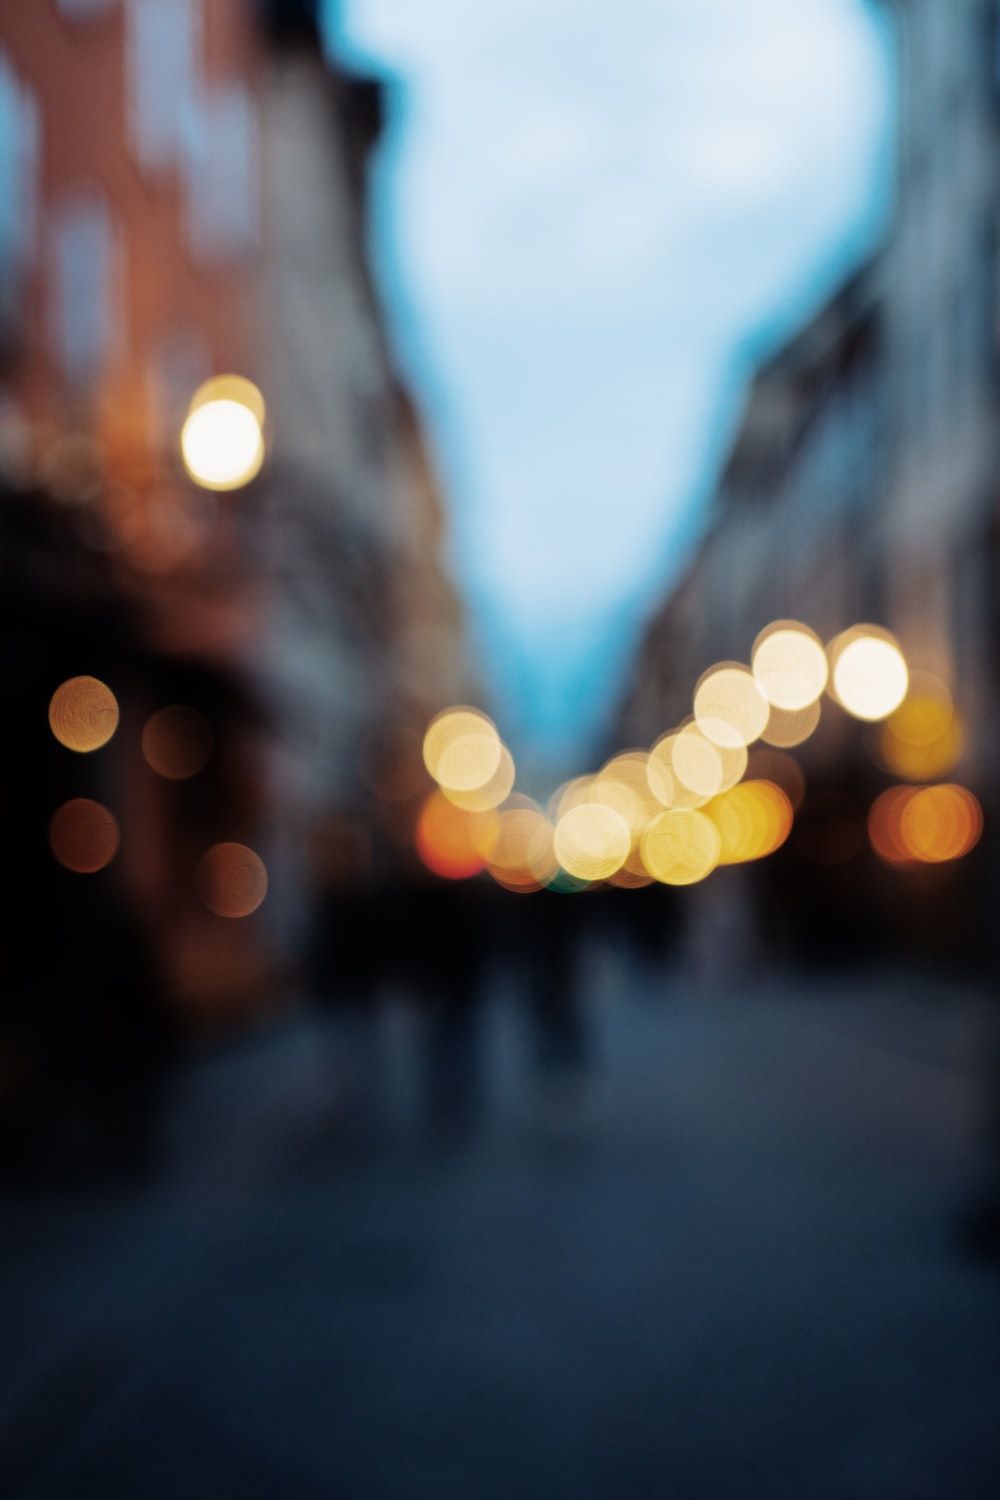 Blurred City Picture. Download Free Image